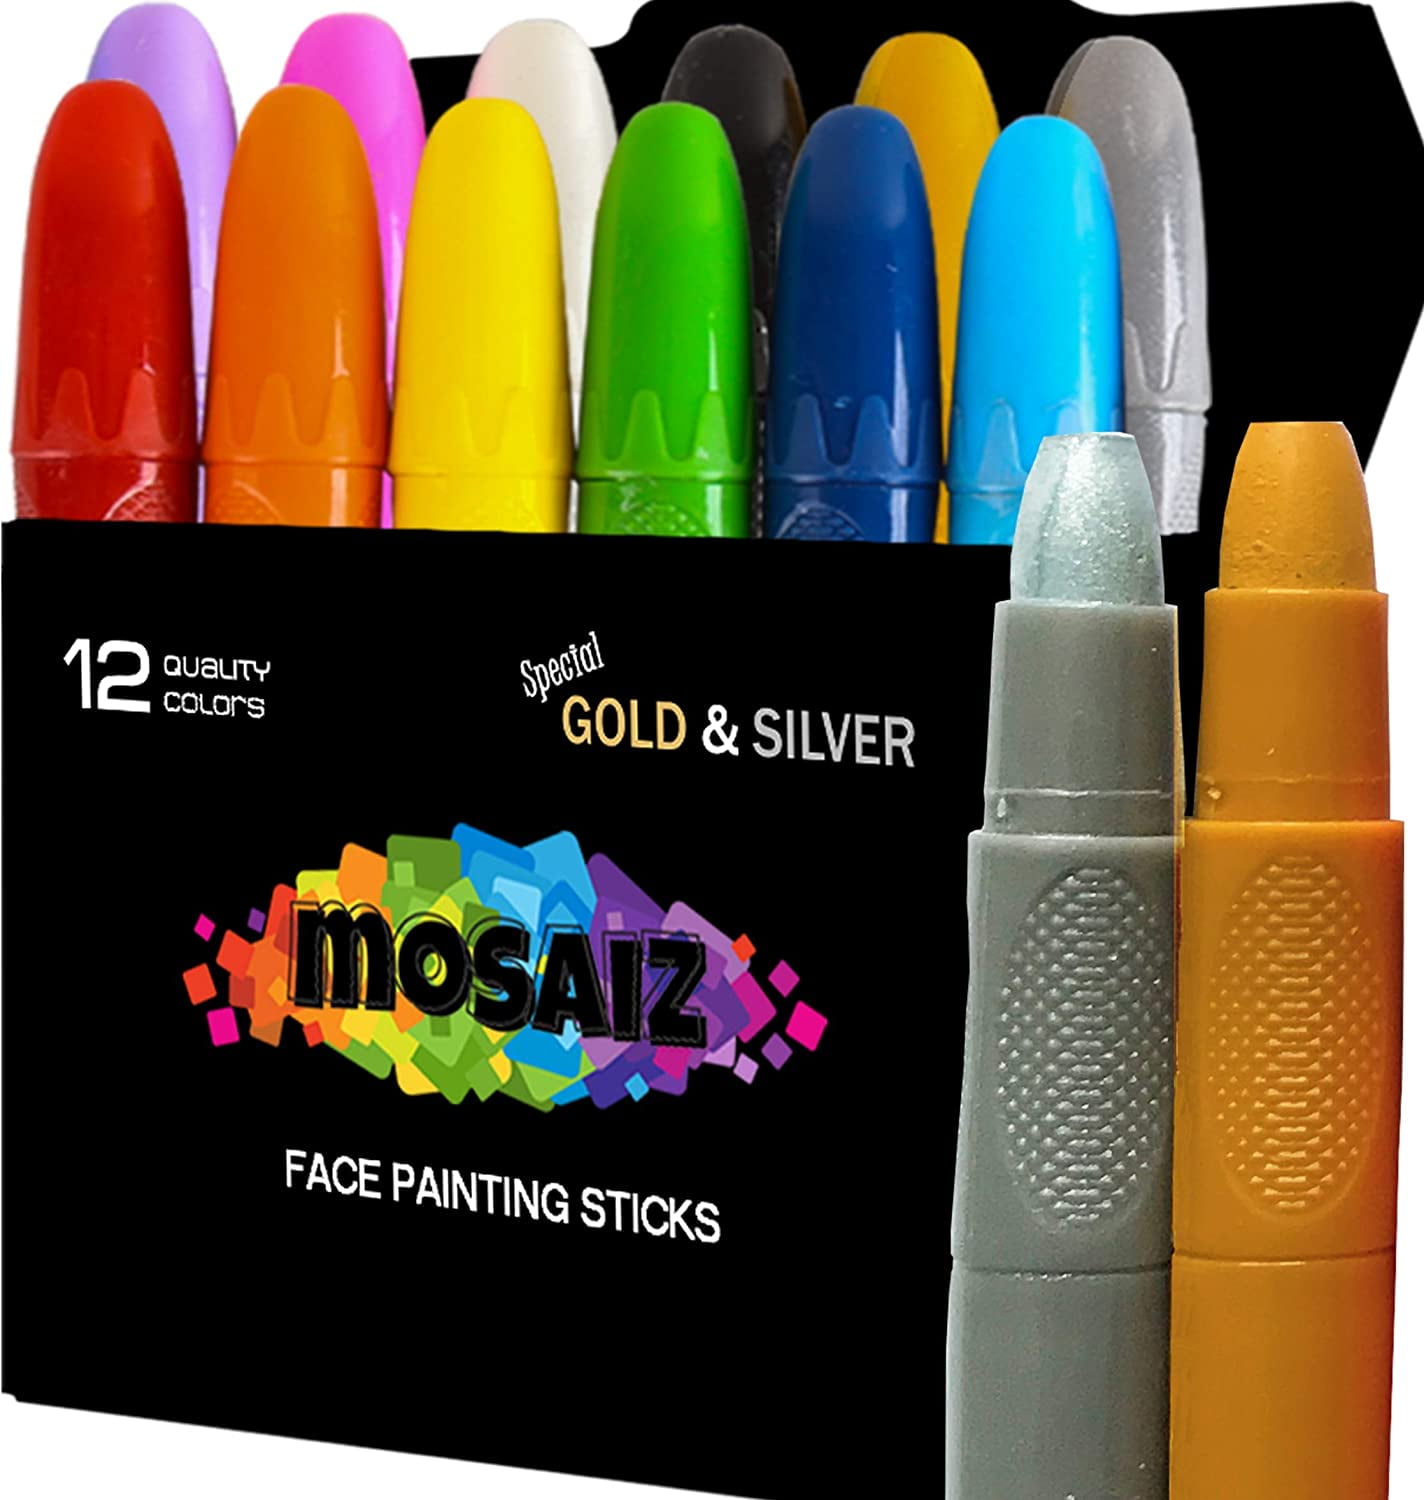 Mosaiz Face Painting Kits for Kids, 12 Colors Water Based Face